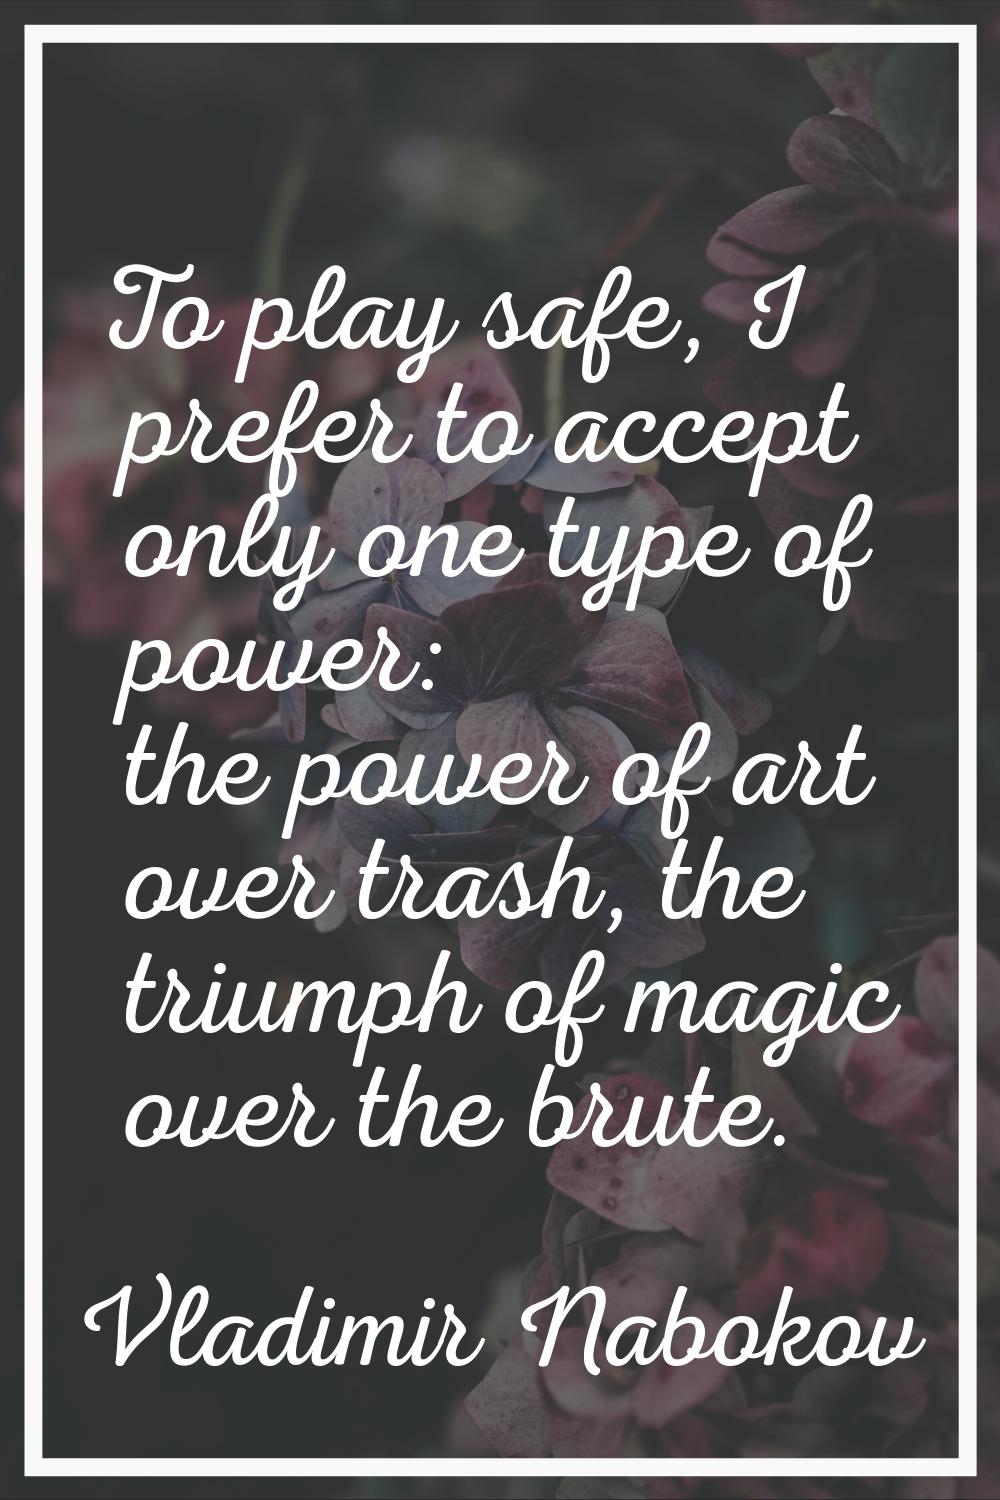 To play safe, I prefer to accept only one type of power: the power of art over trash, the triumph o